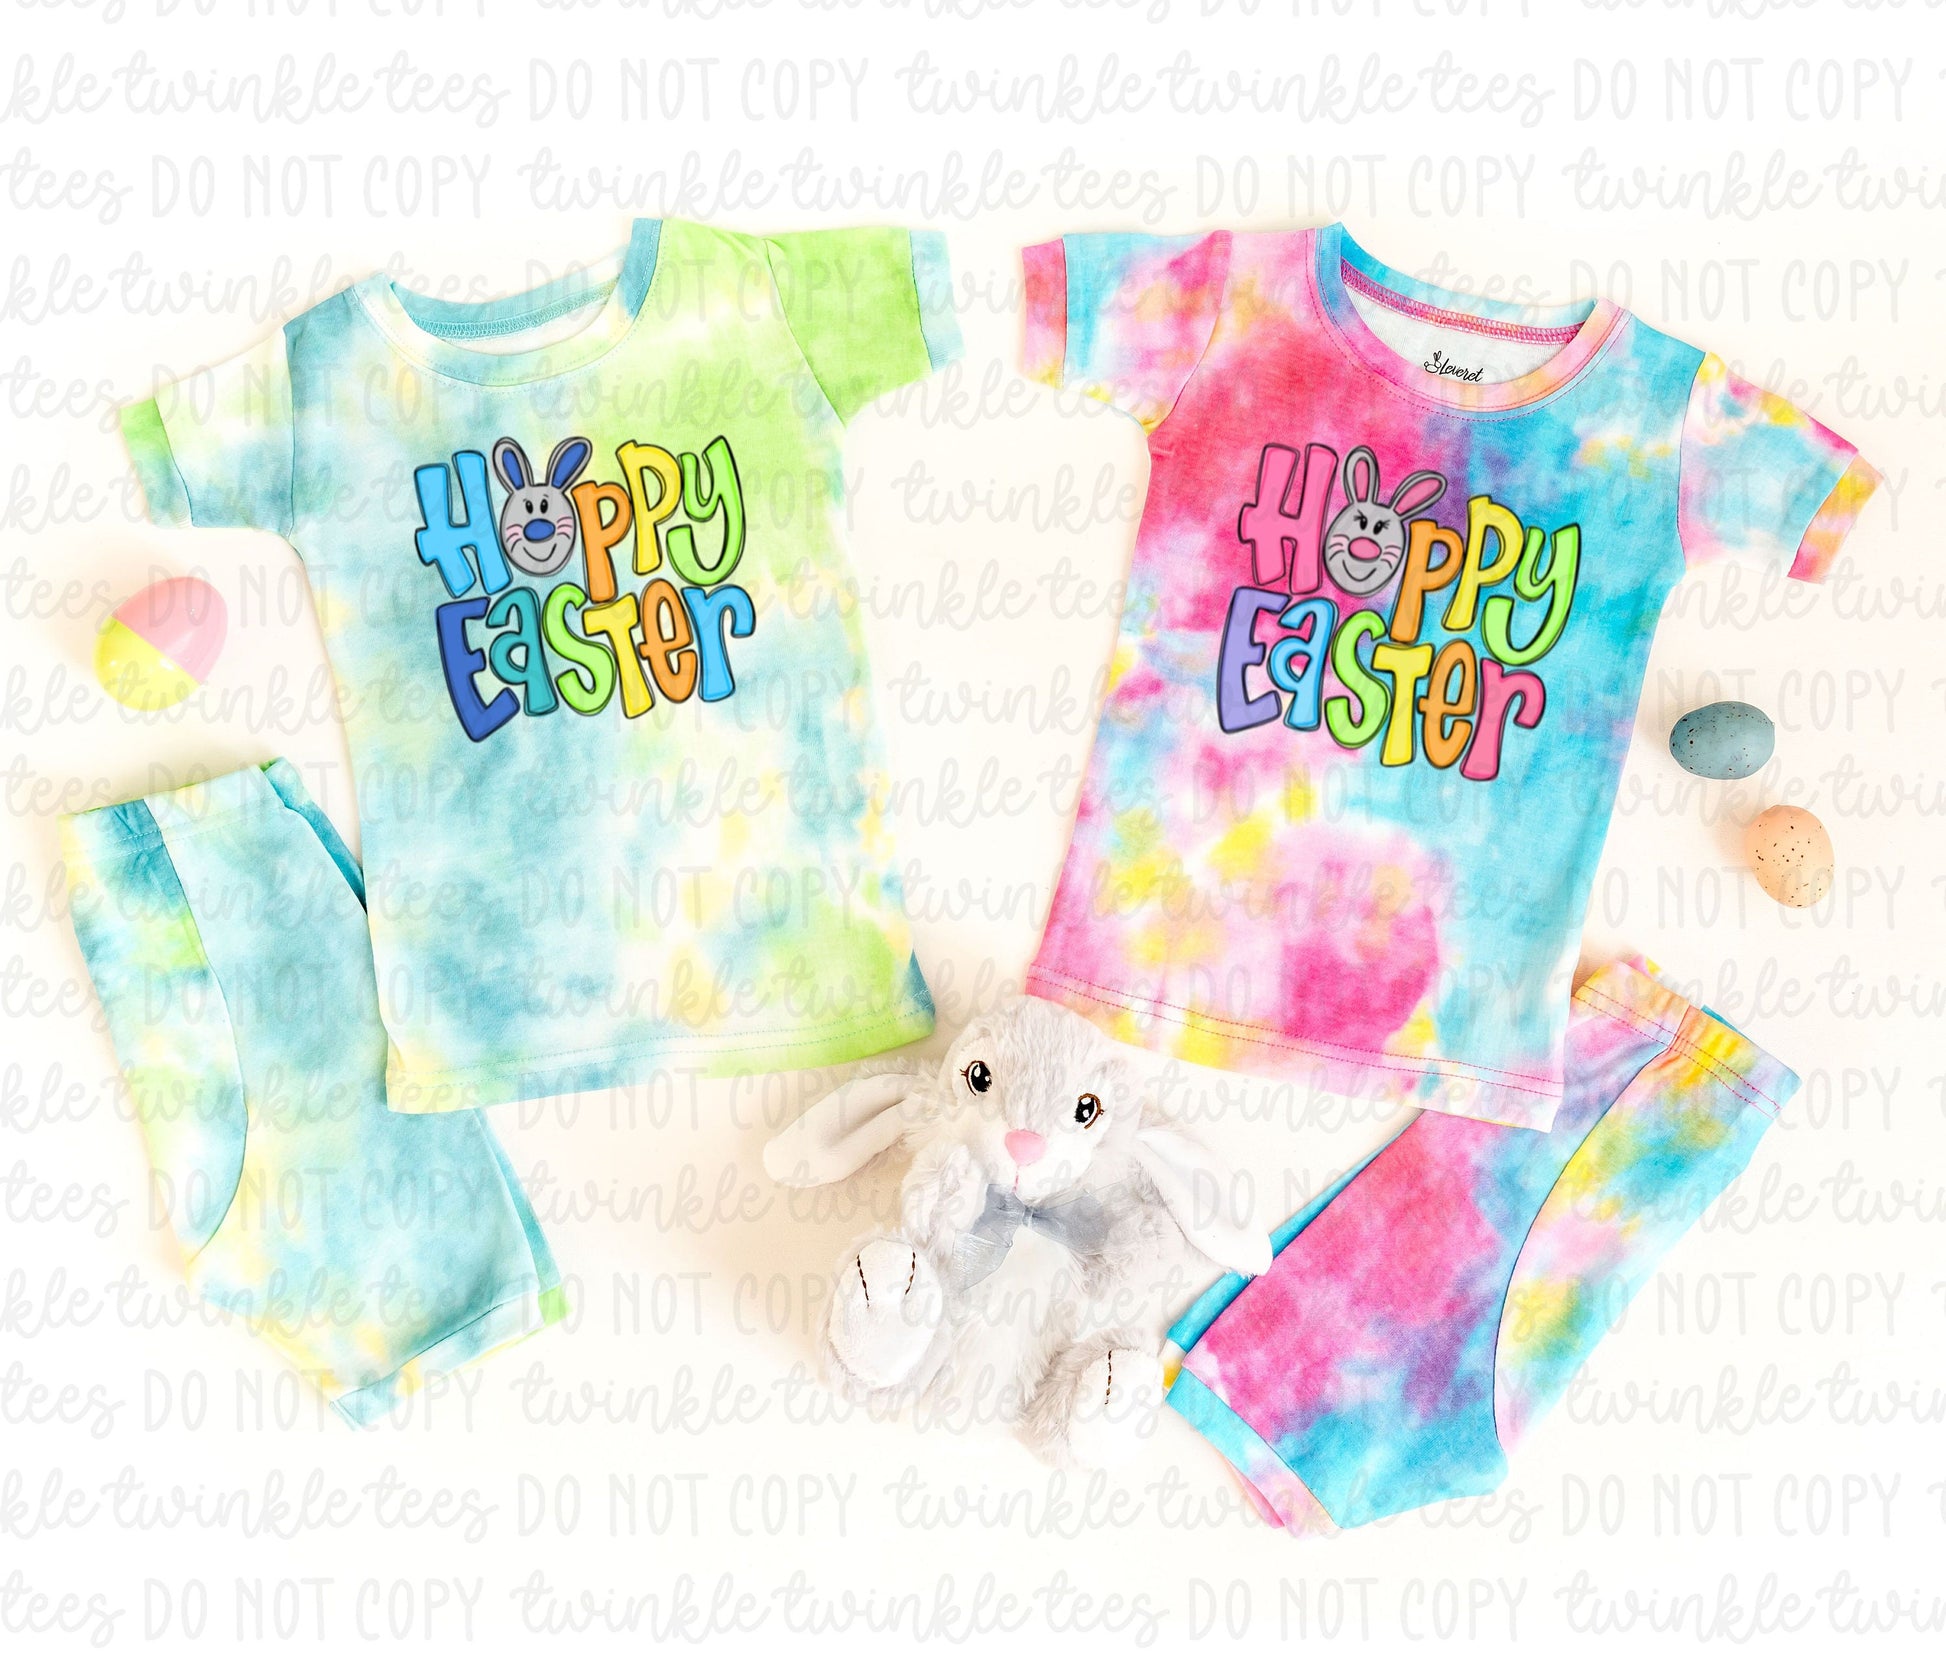 Happy Easter Pink and Blue Tie Dye Mix Shorts Pajamas, tie dye easter pajamas